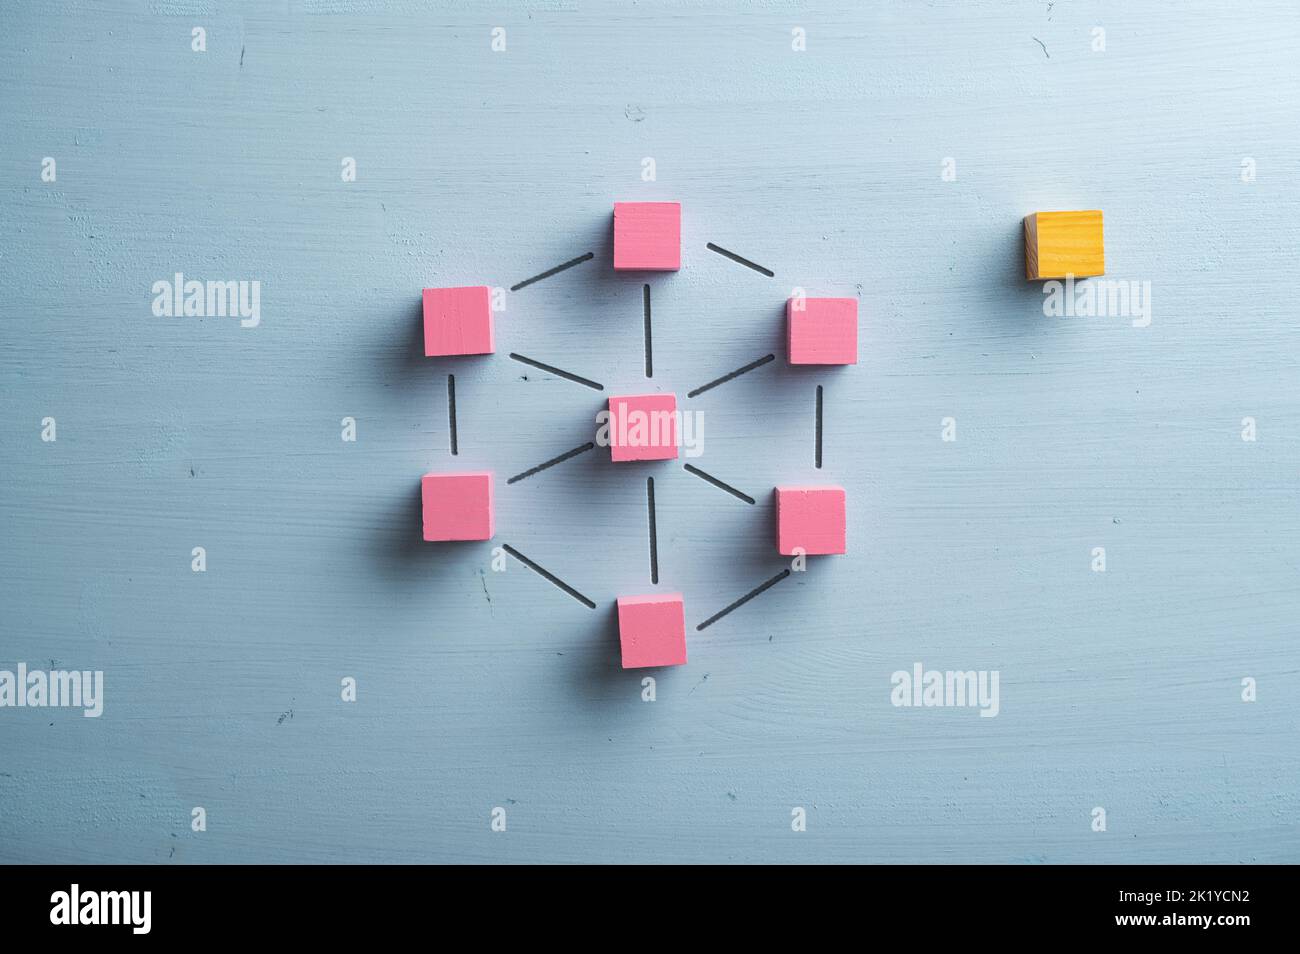 Network of pink wooden blocks connected with imaginary lines and a blank block as an outsider placed next to them. Over pastel blue wooden background. Stock Photo